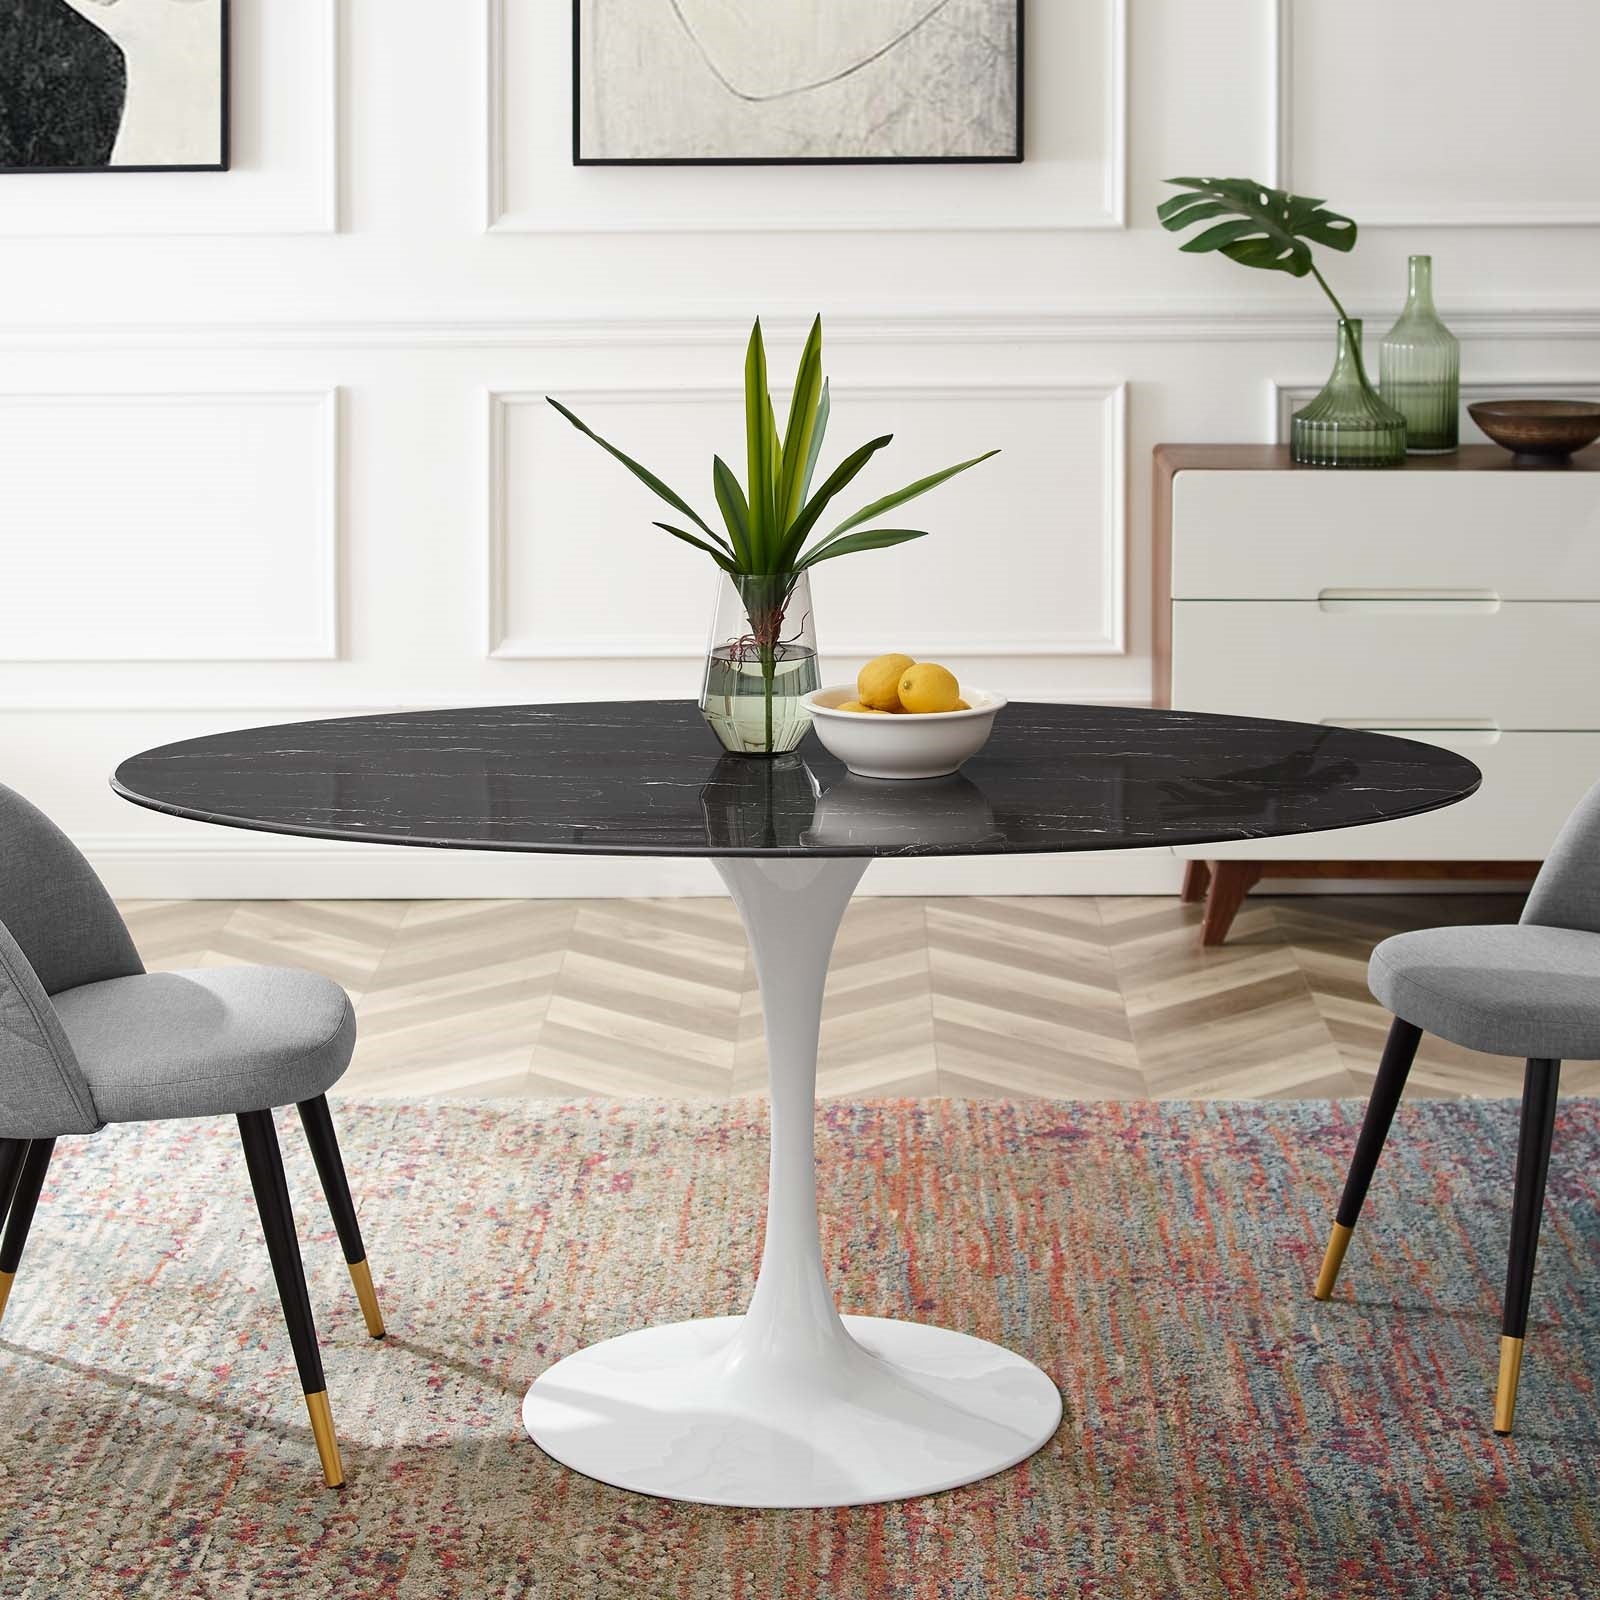 Tulip Style 60" Black Artificial Marble Dining Table